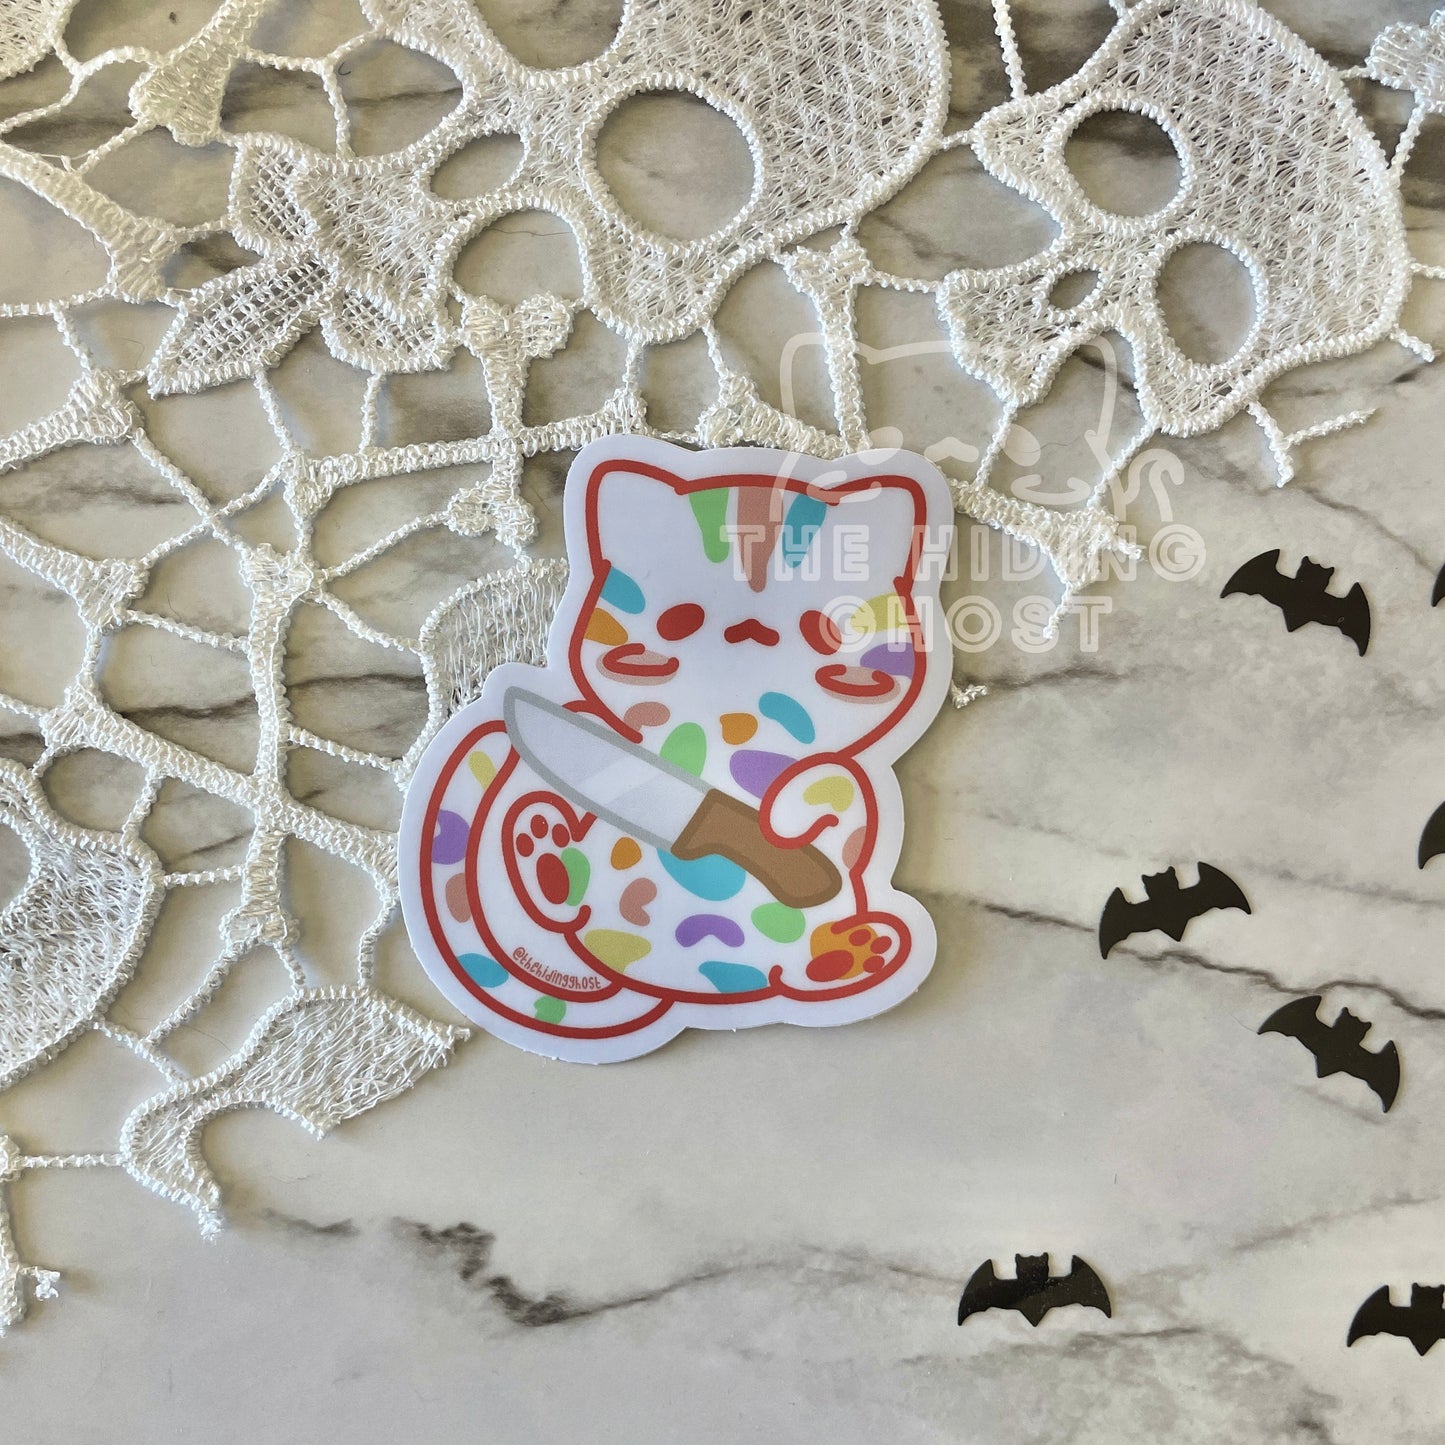 Cereal Killer Kitty Stickers